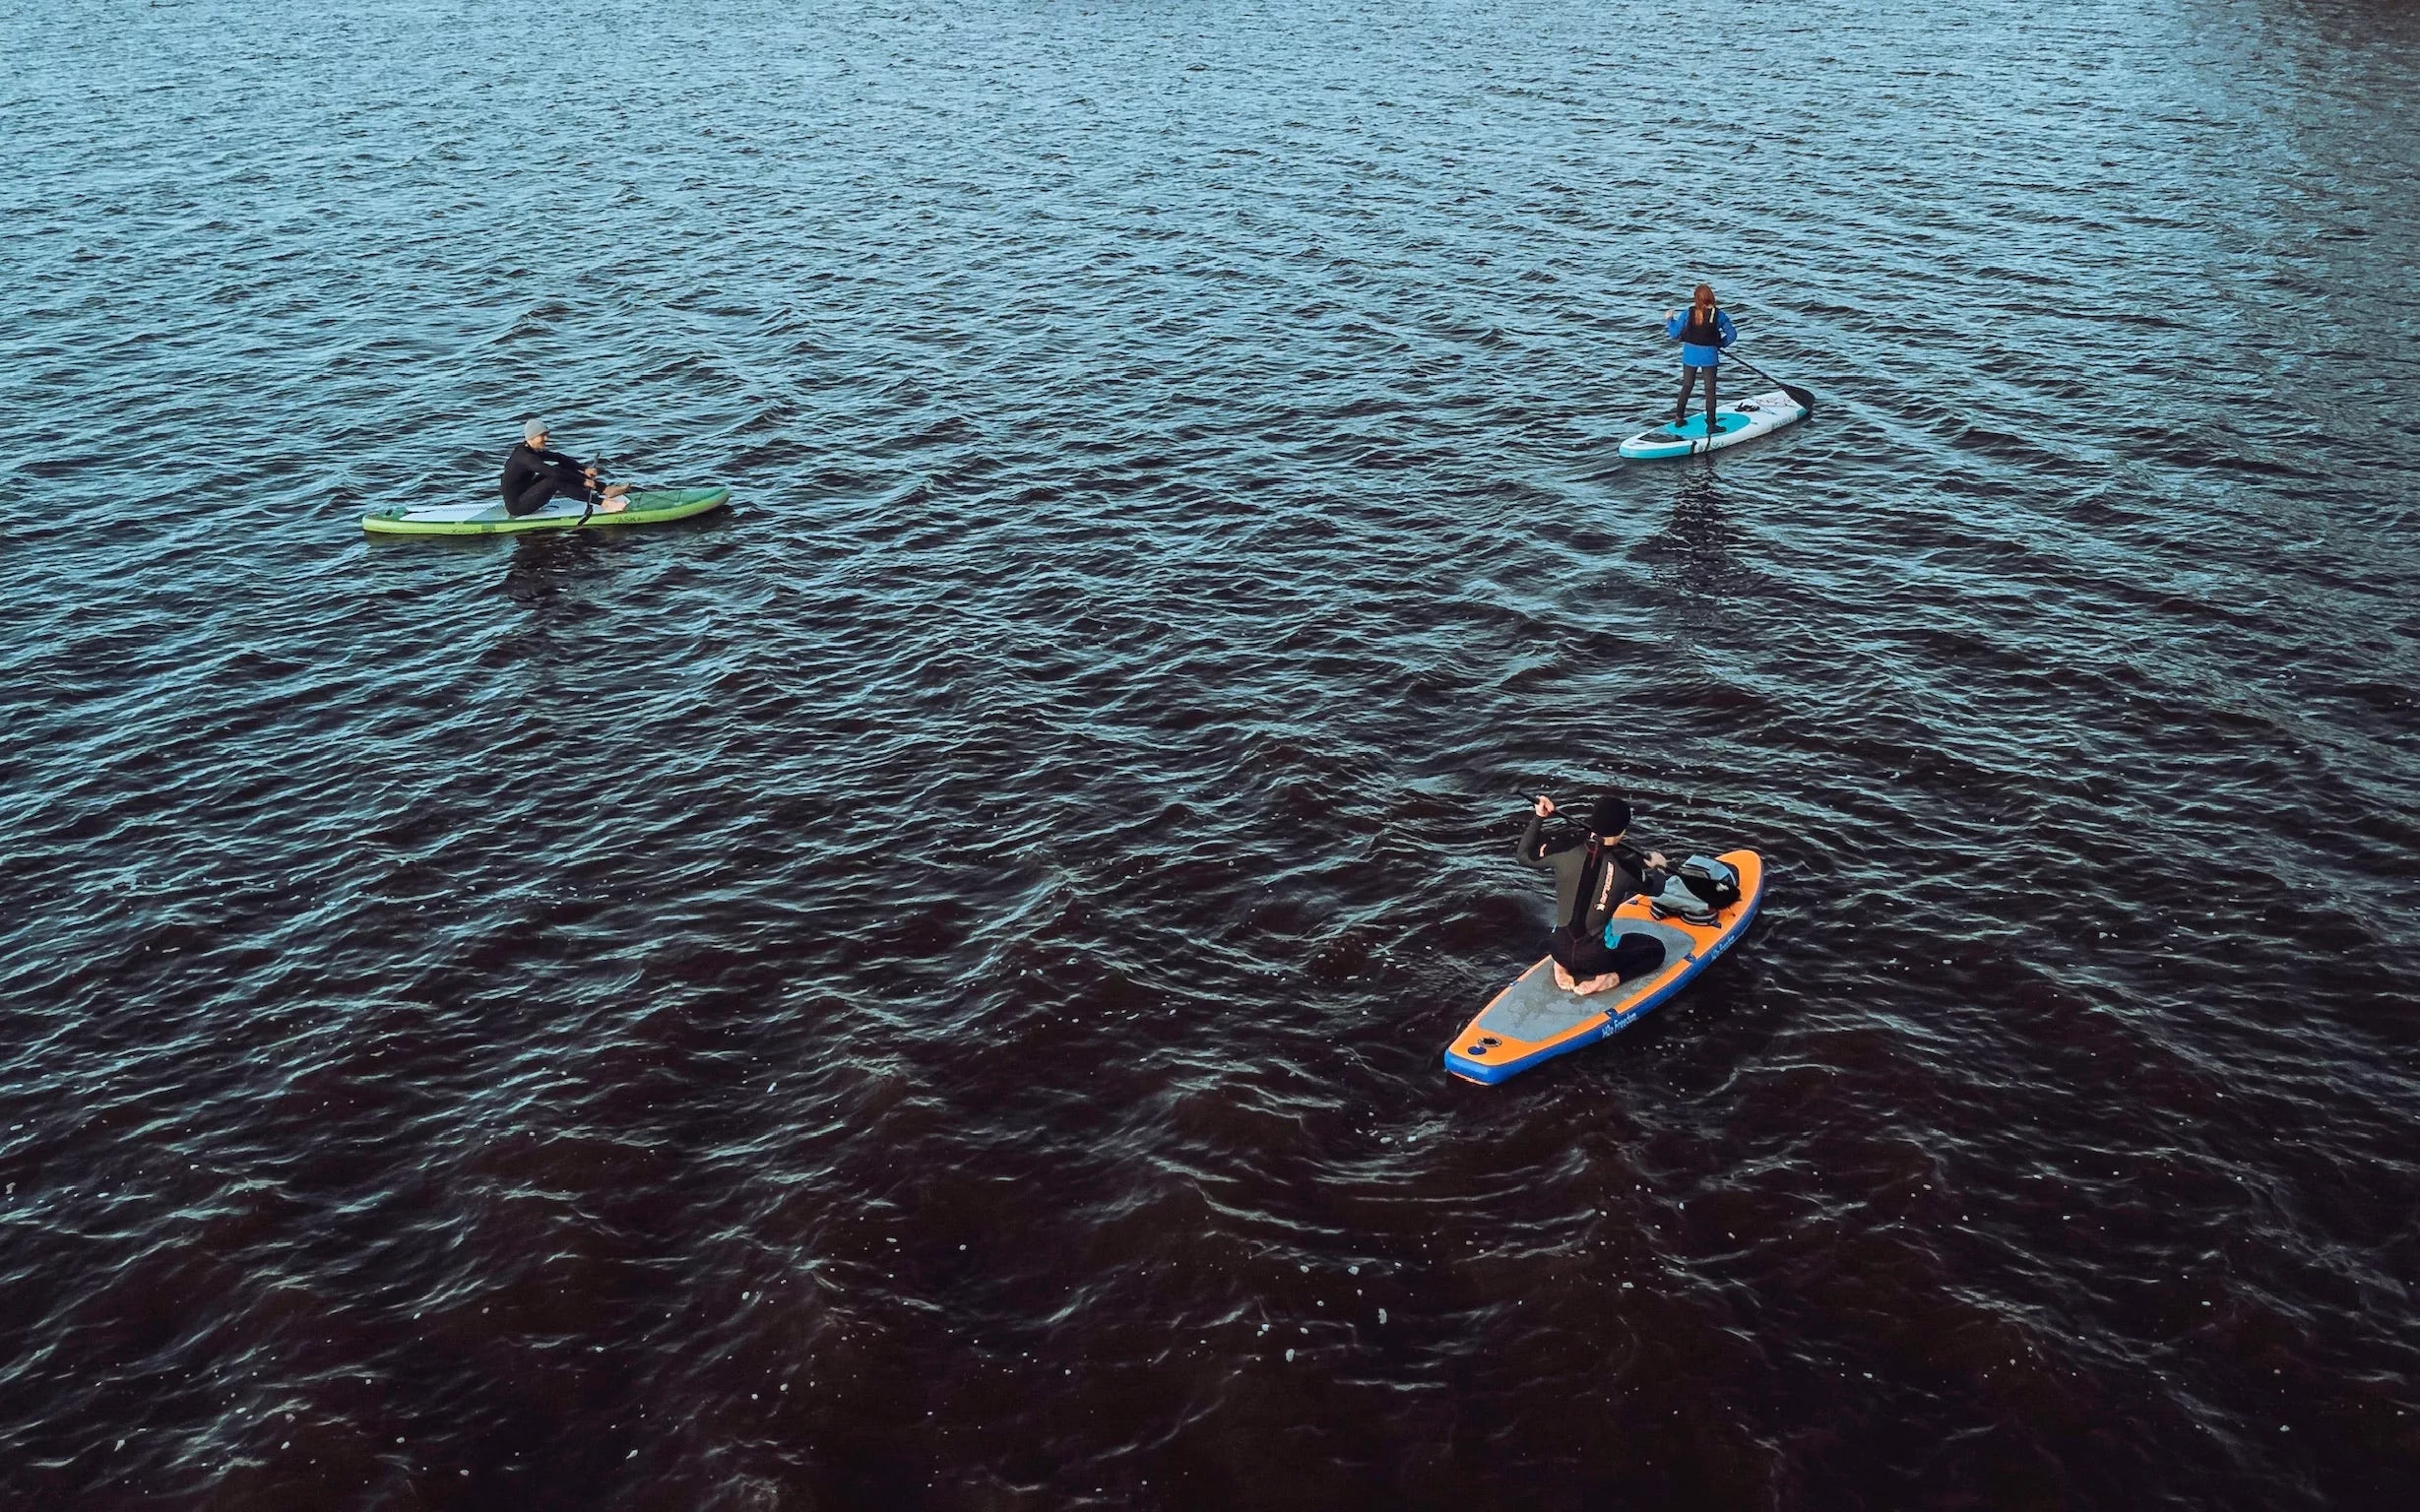 Stand Up Paddle Boarding. (SUP'ing).